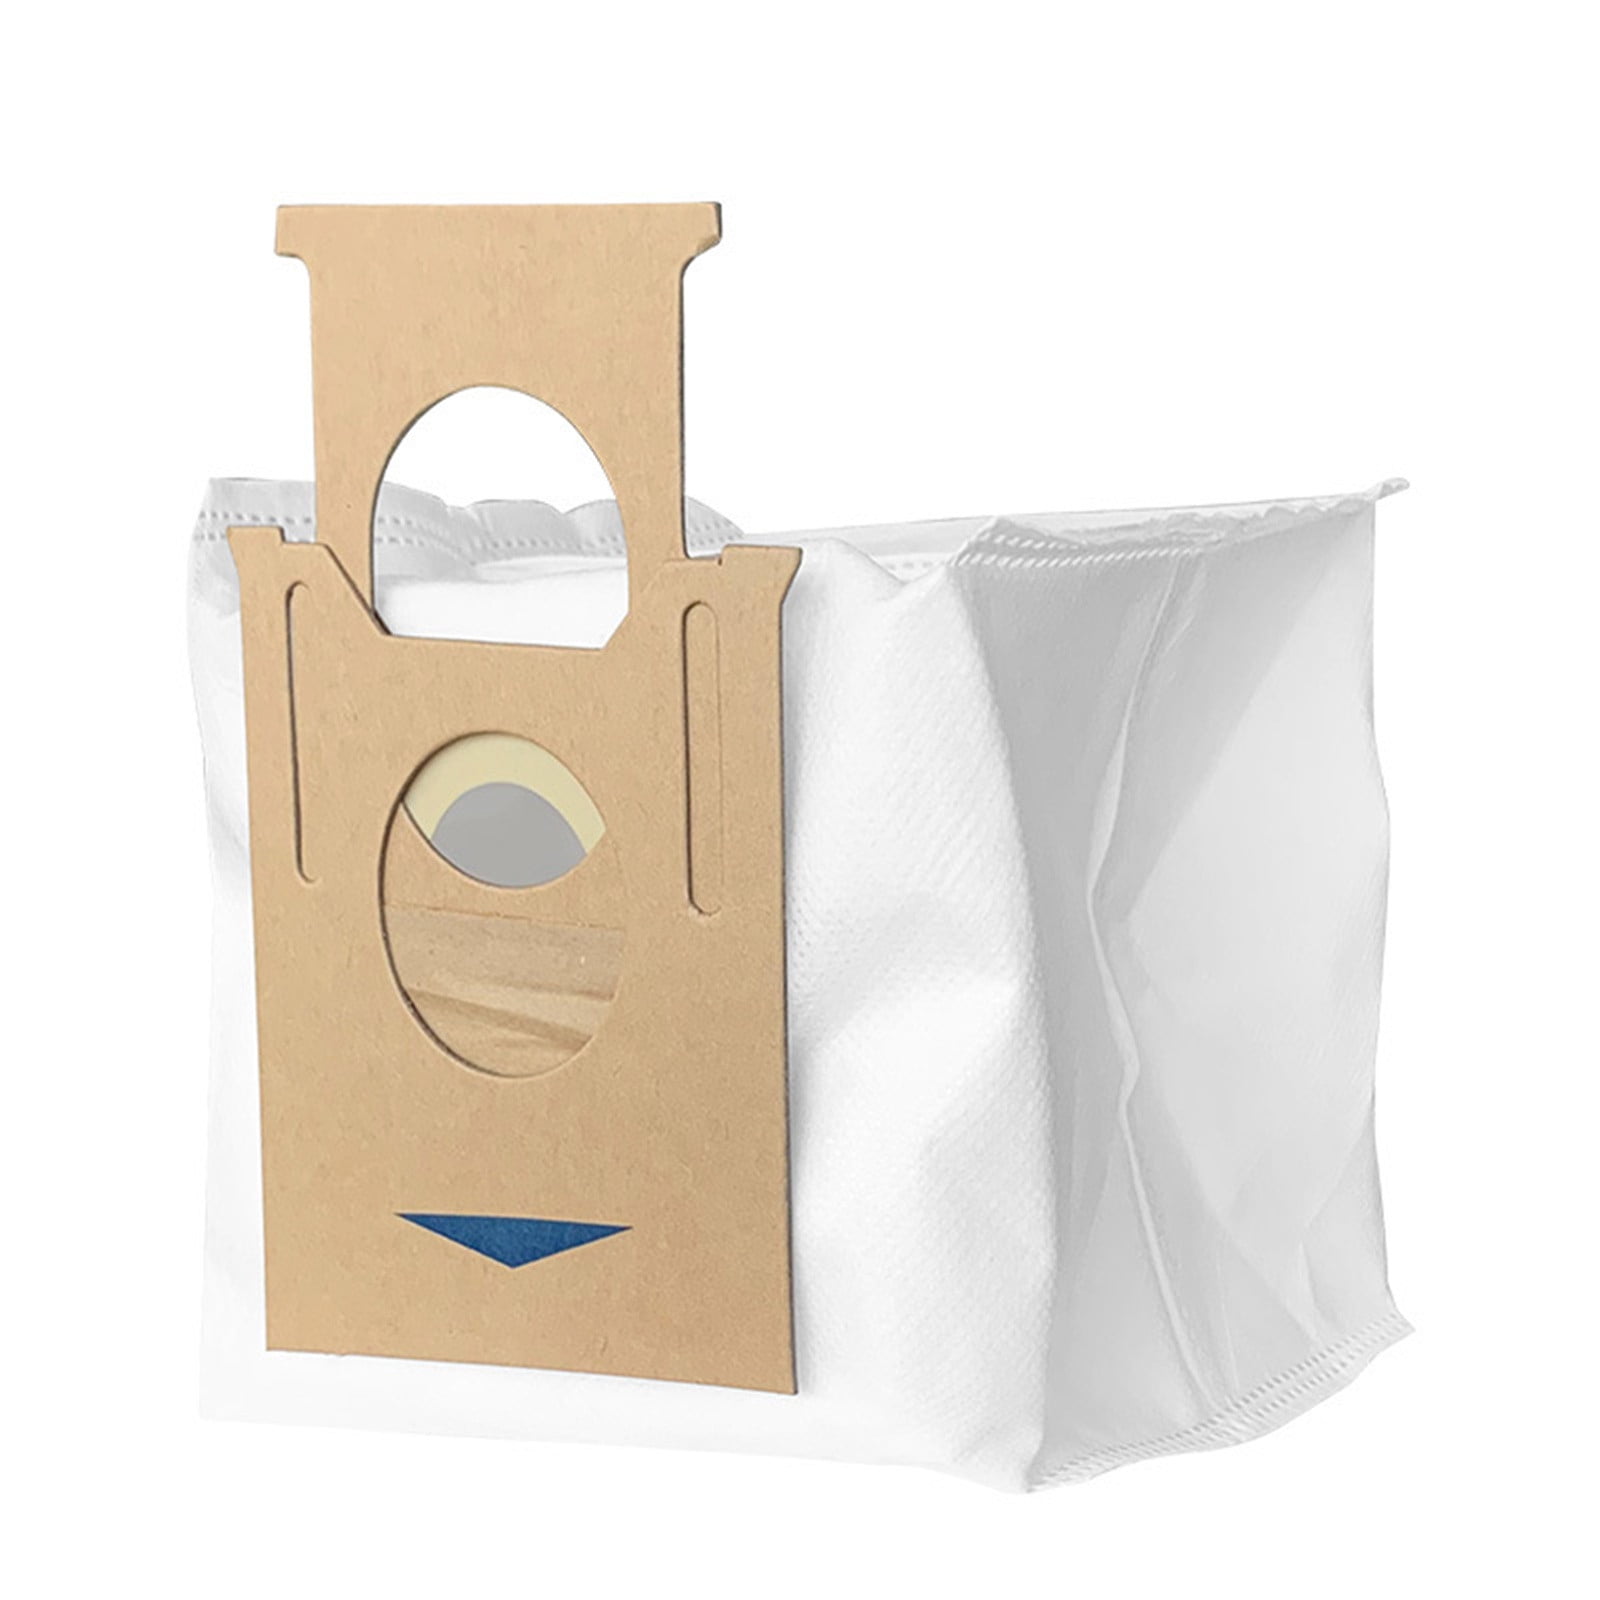 Details about   5x Dust Bags Replacement For ECOVACS T8/T8AIVI/DX93 Vacuum Cleaner Parts 